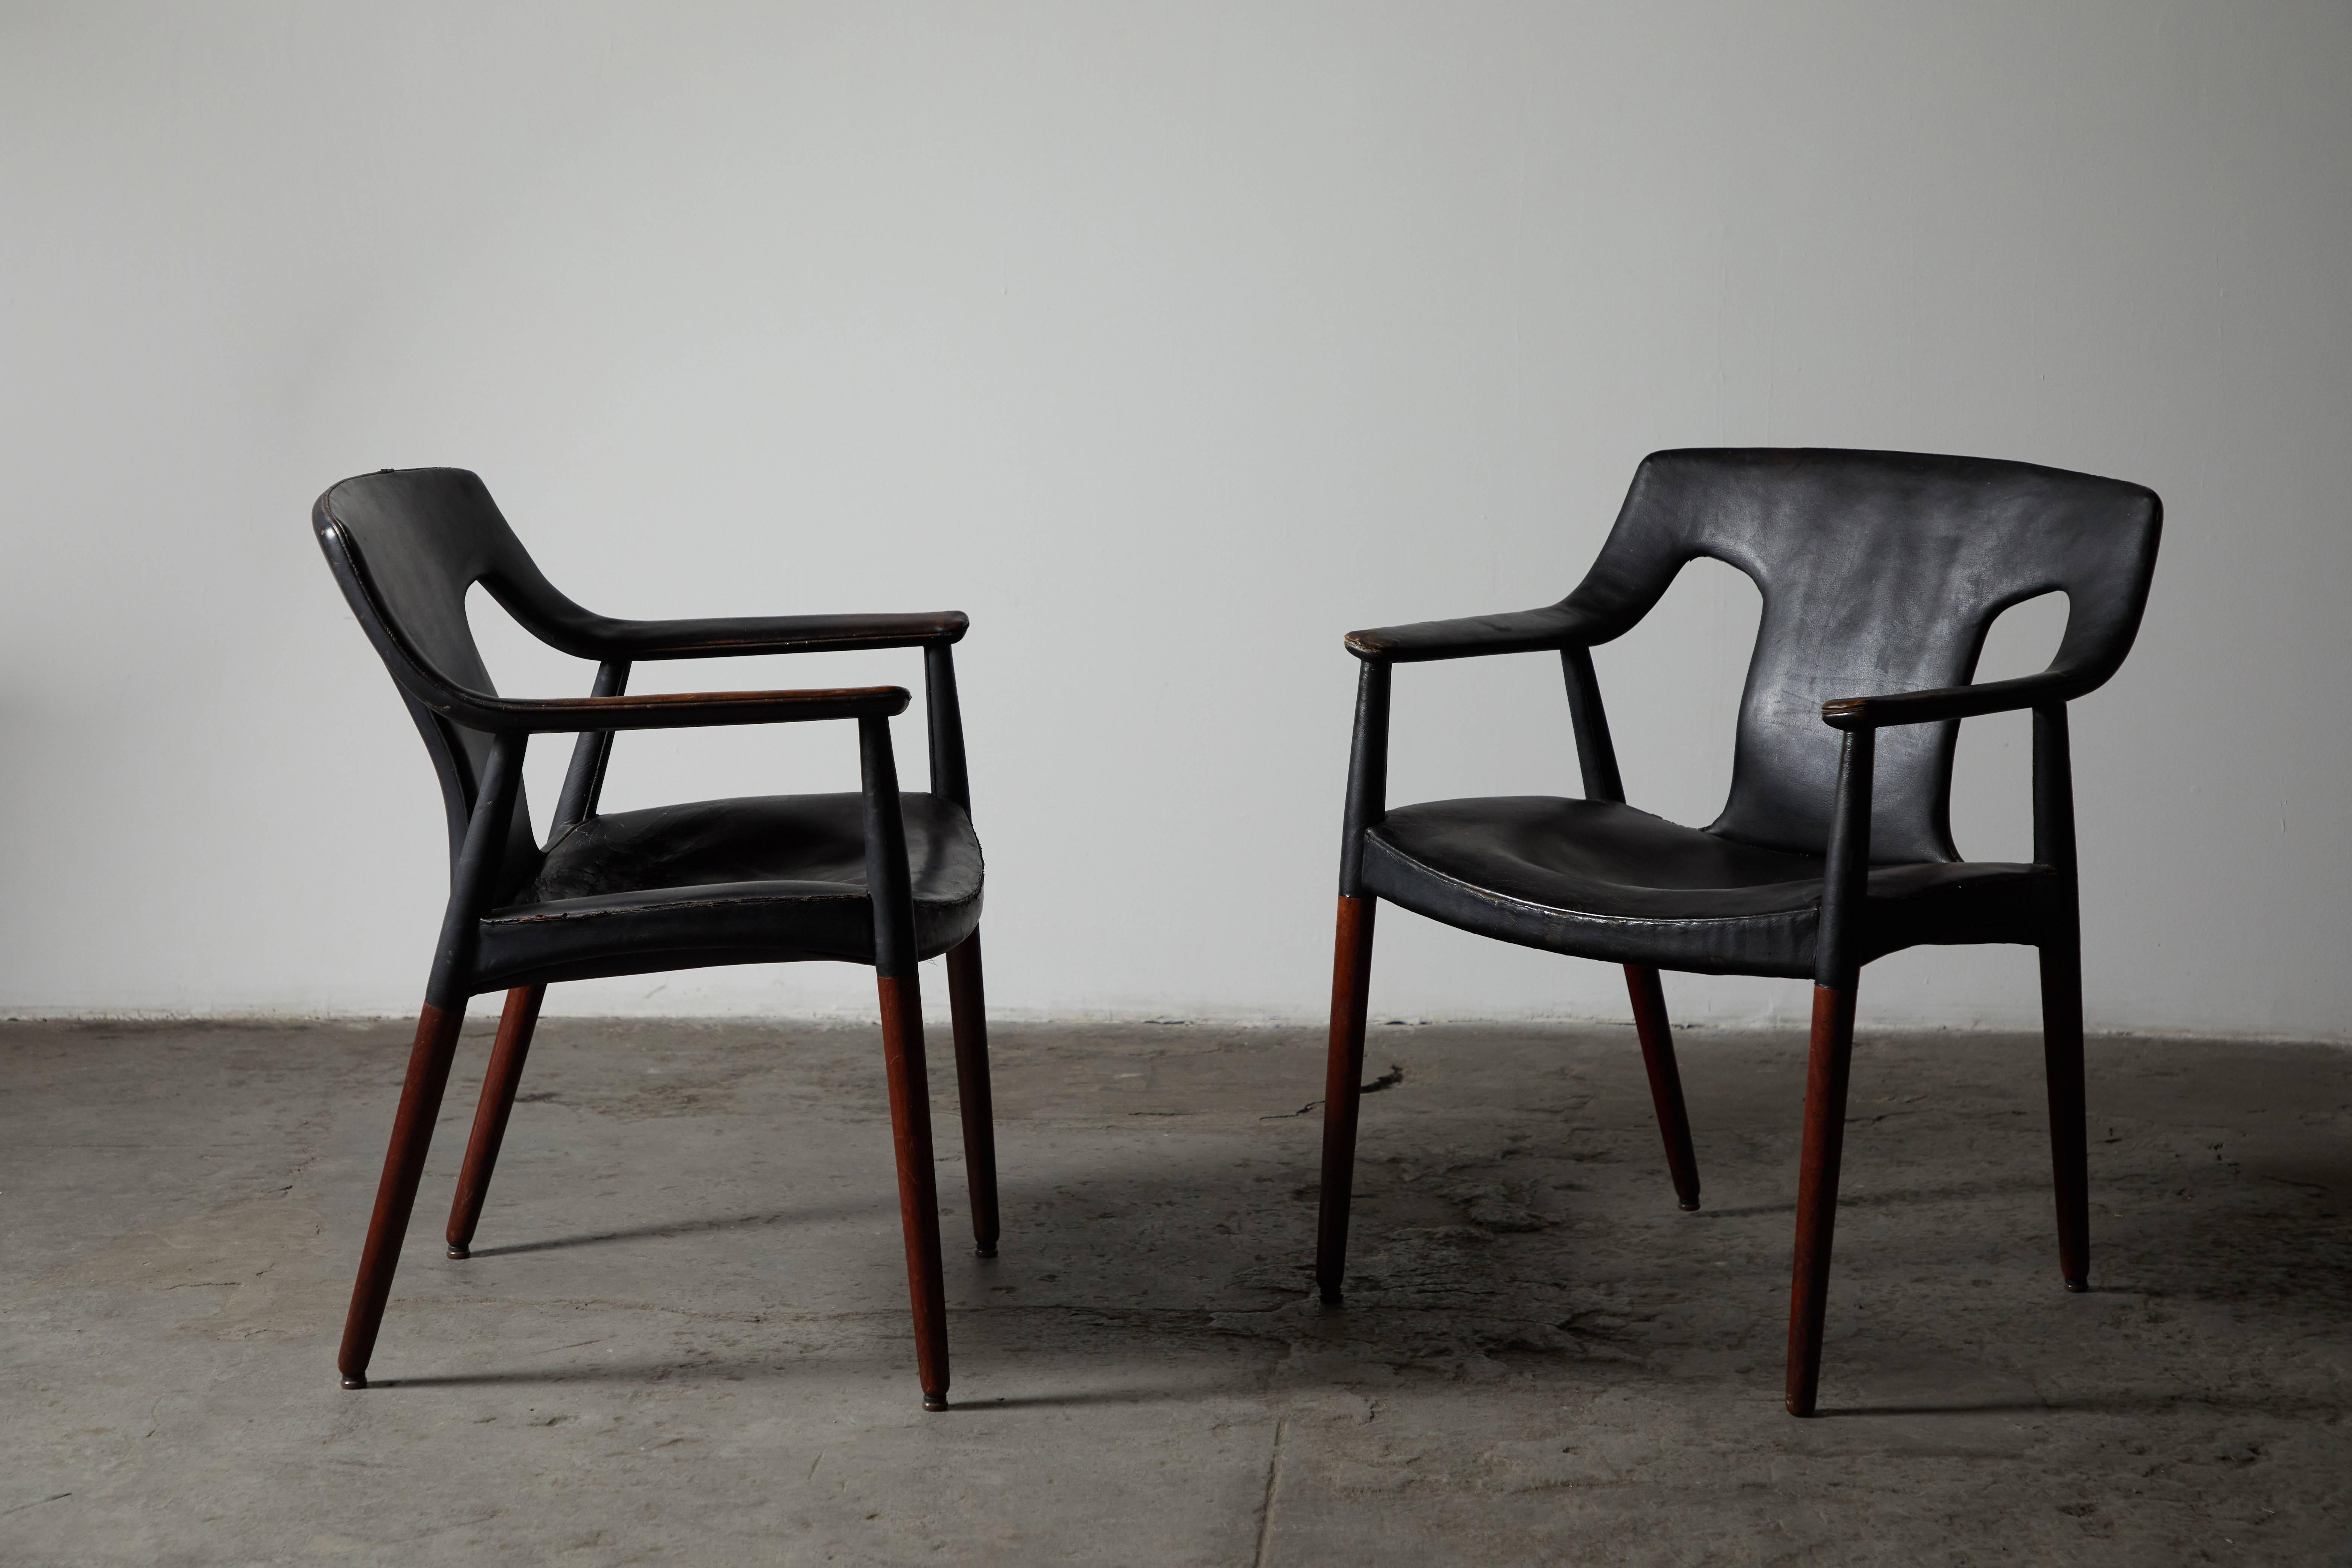 Rare pair of leather and rosewood lounge chairs by Aksel Bender Madsen and Ejner Larsen. Made in Denmark, circa 1956.
 